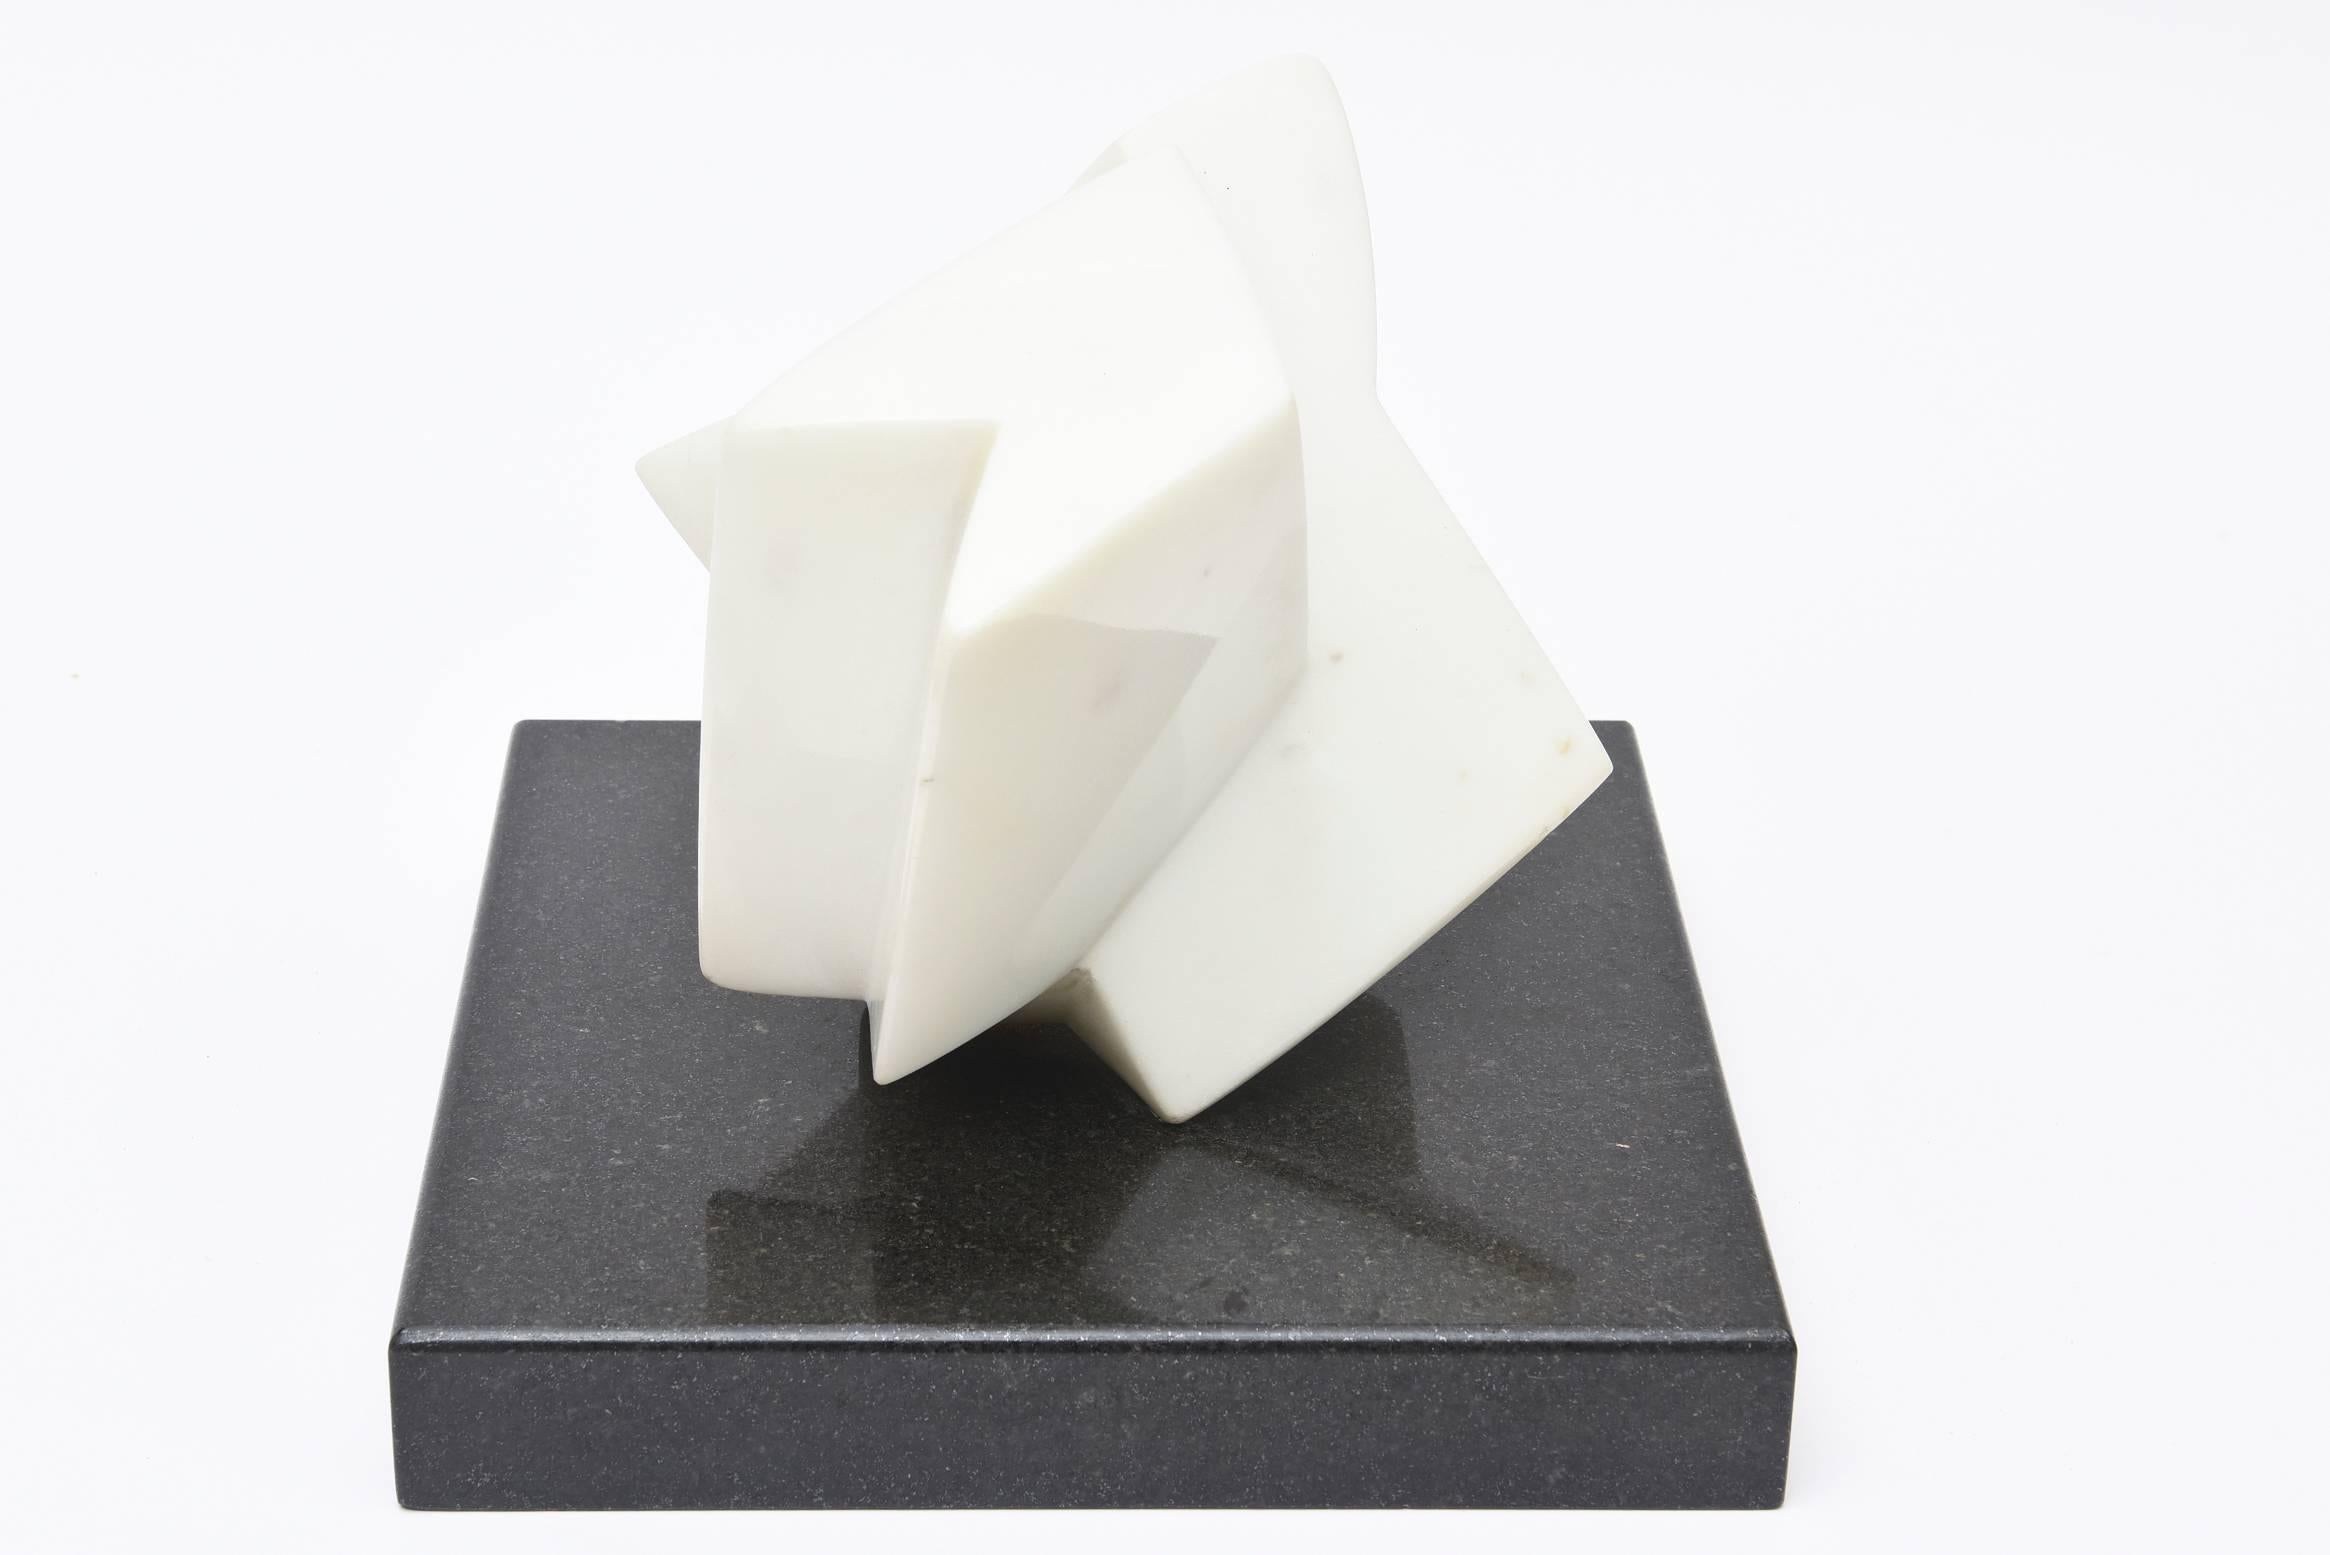 This listed British sculptor's work was done in, 1967 and signed as shown on the image#7 by Michael Stallard. 
He has exhibited at the royal academy in London and is a member of the royal society of British sculptors.
Mr. Stallard's work is